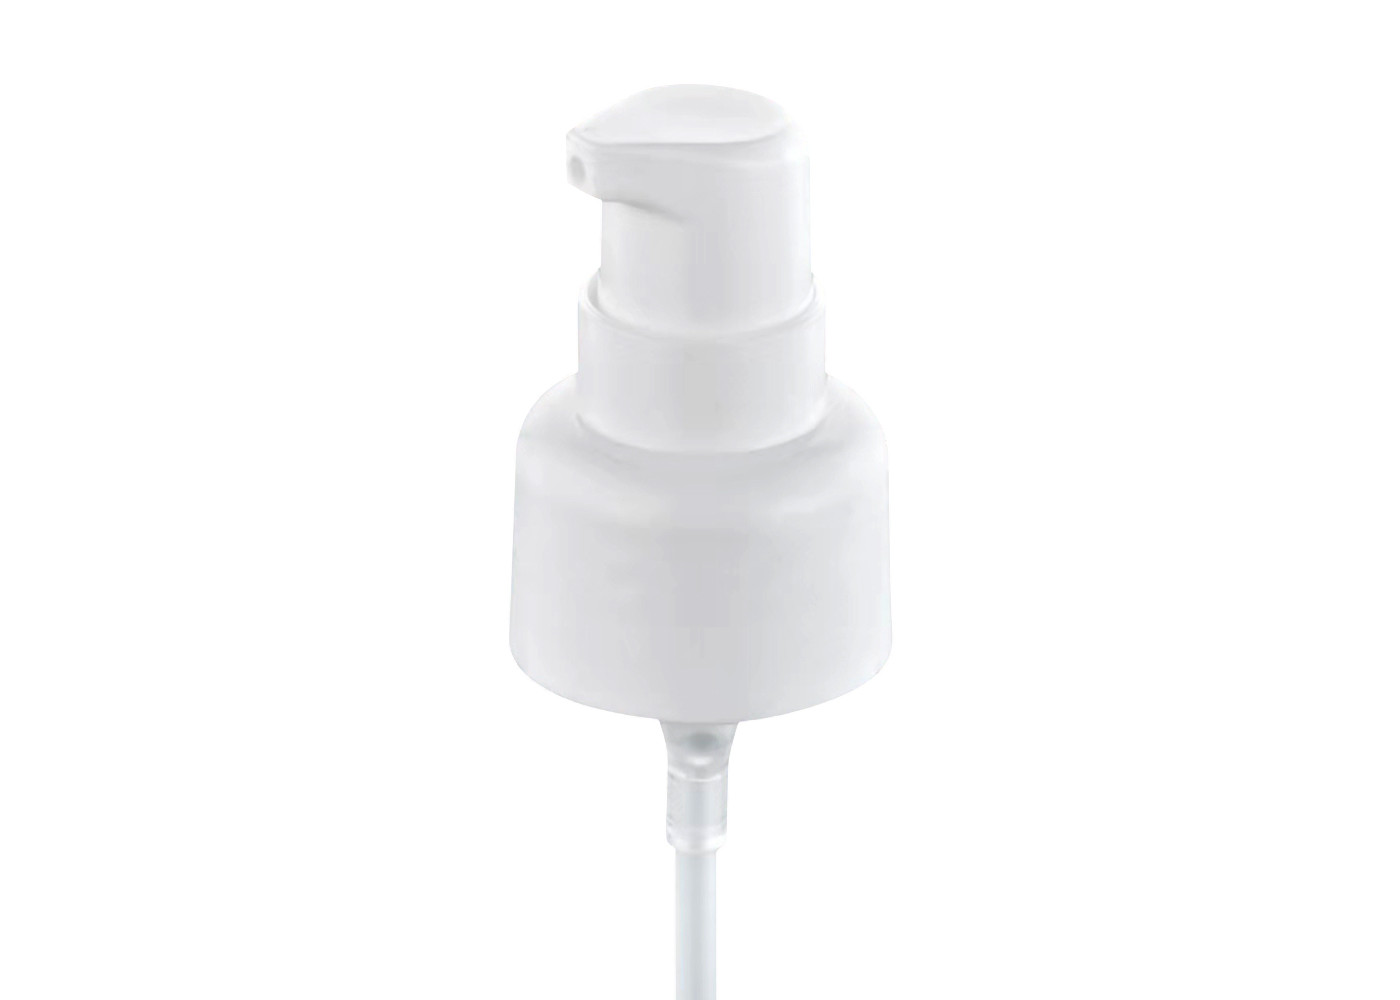  Facial Skin Care Cosmetic Treatment Pumps With Smooth Surface Dispenser Manufactures